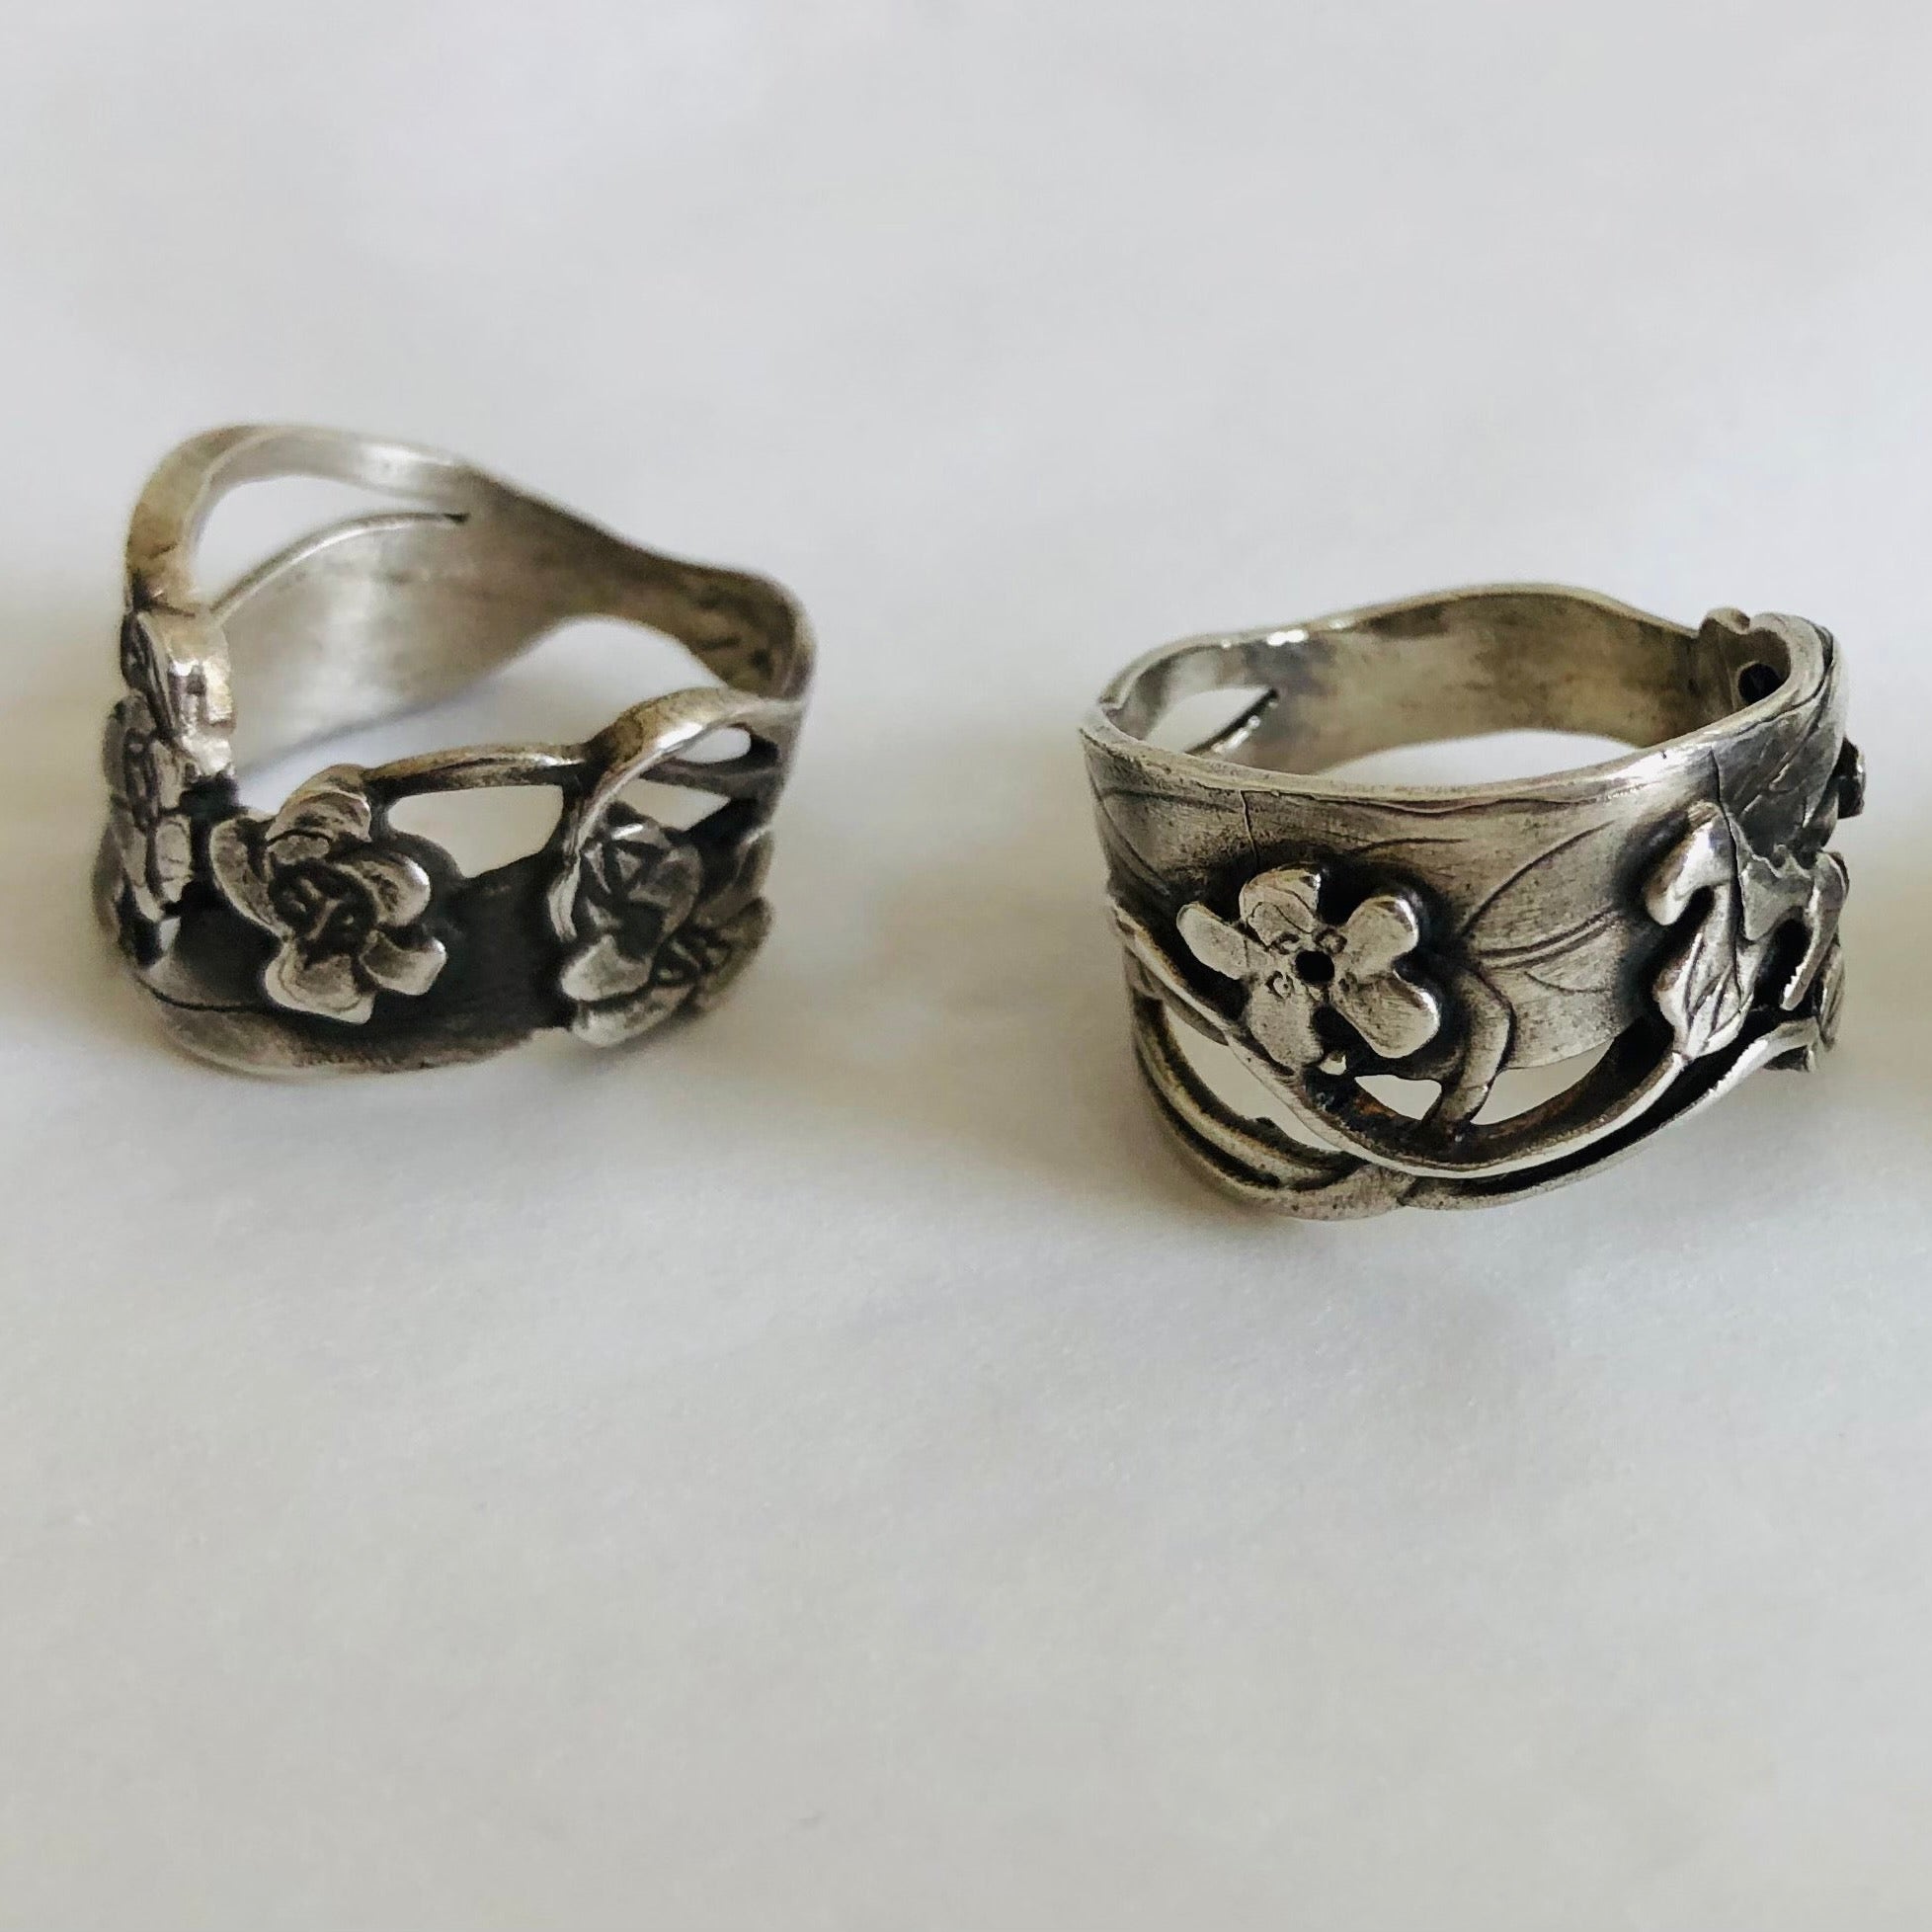 Two silver rings with a floral design